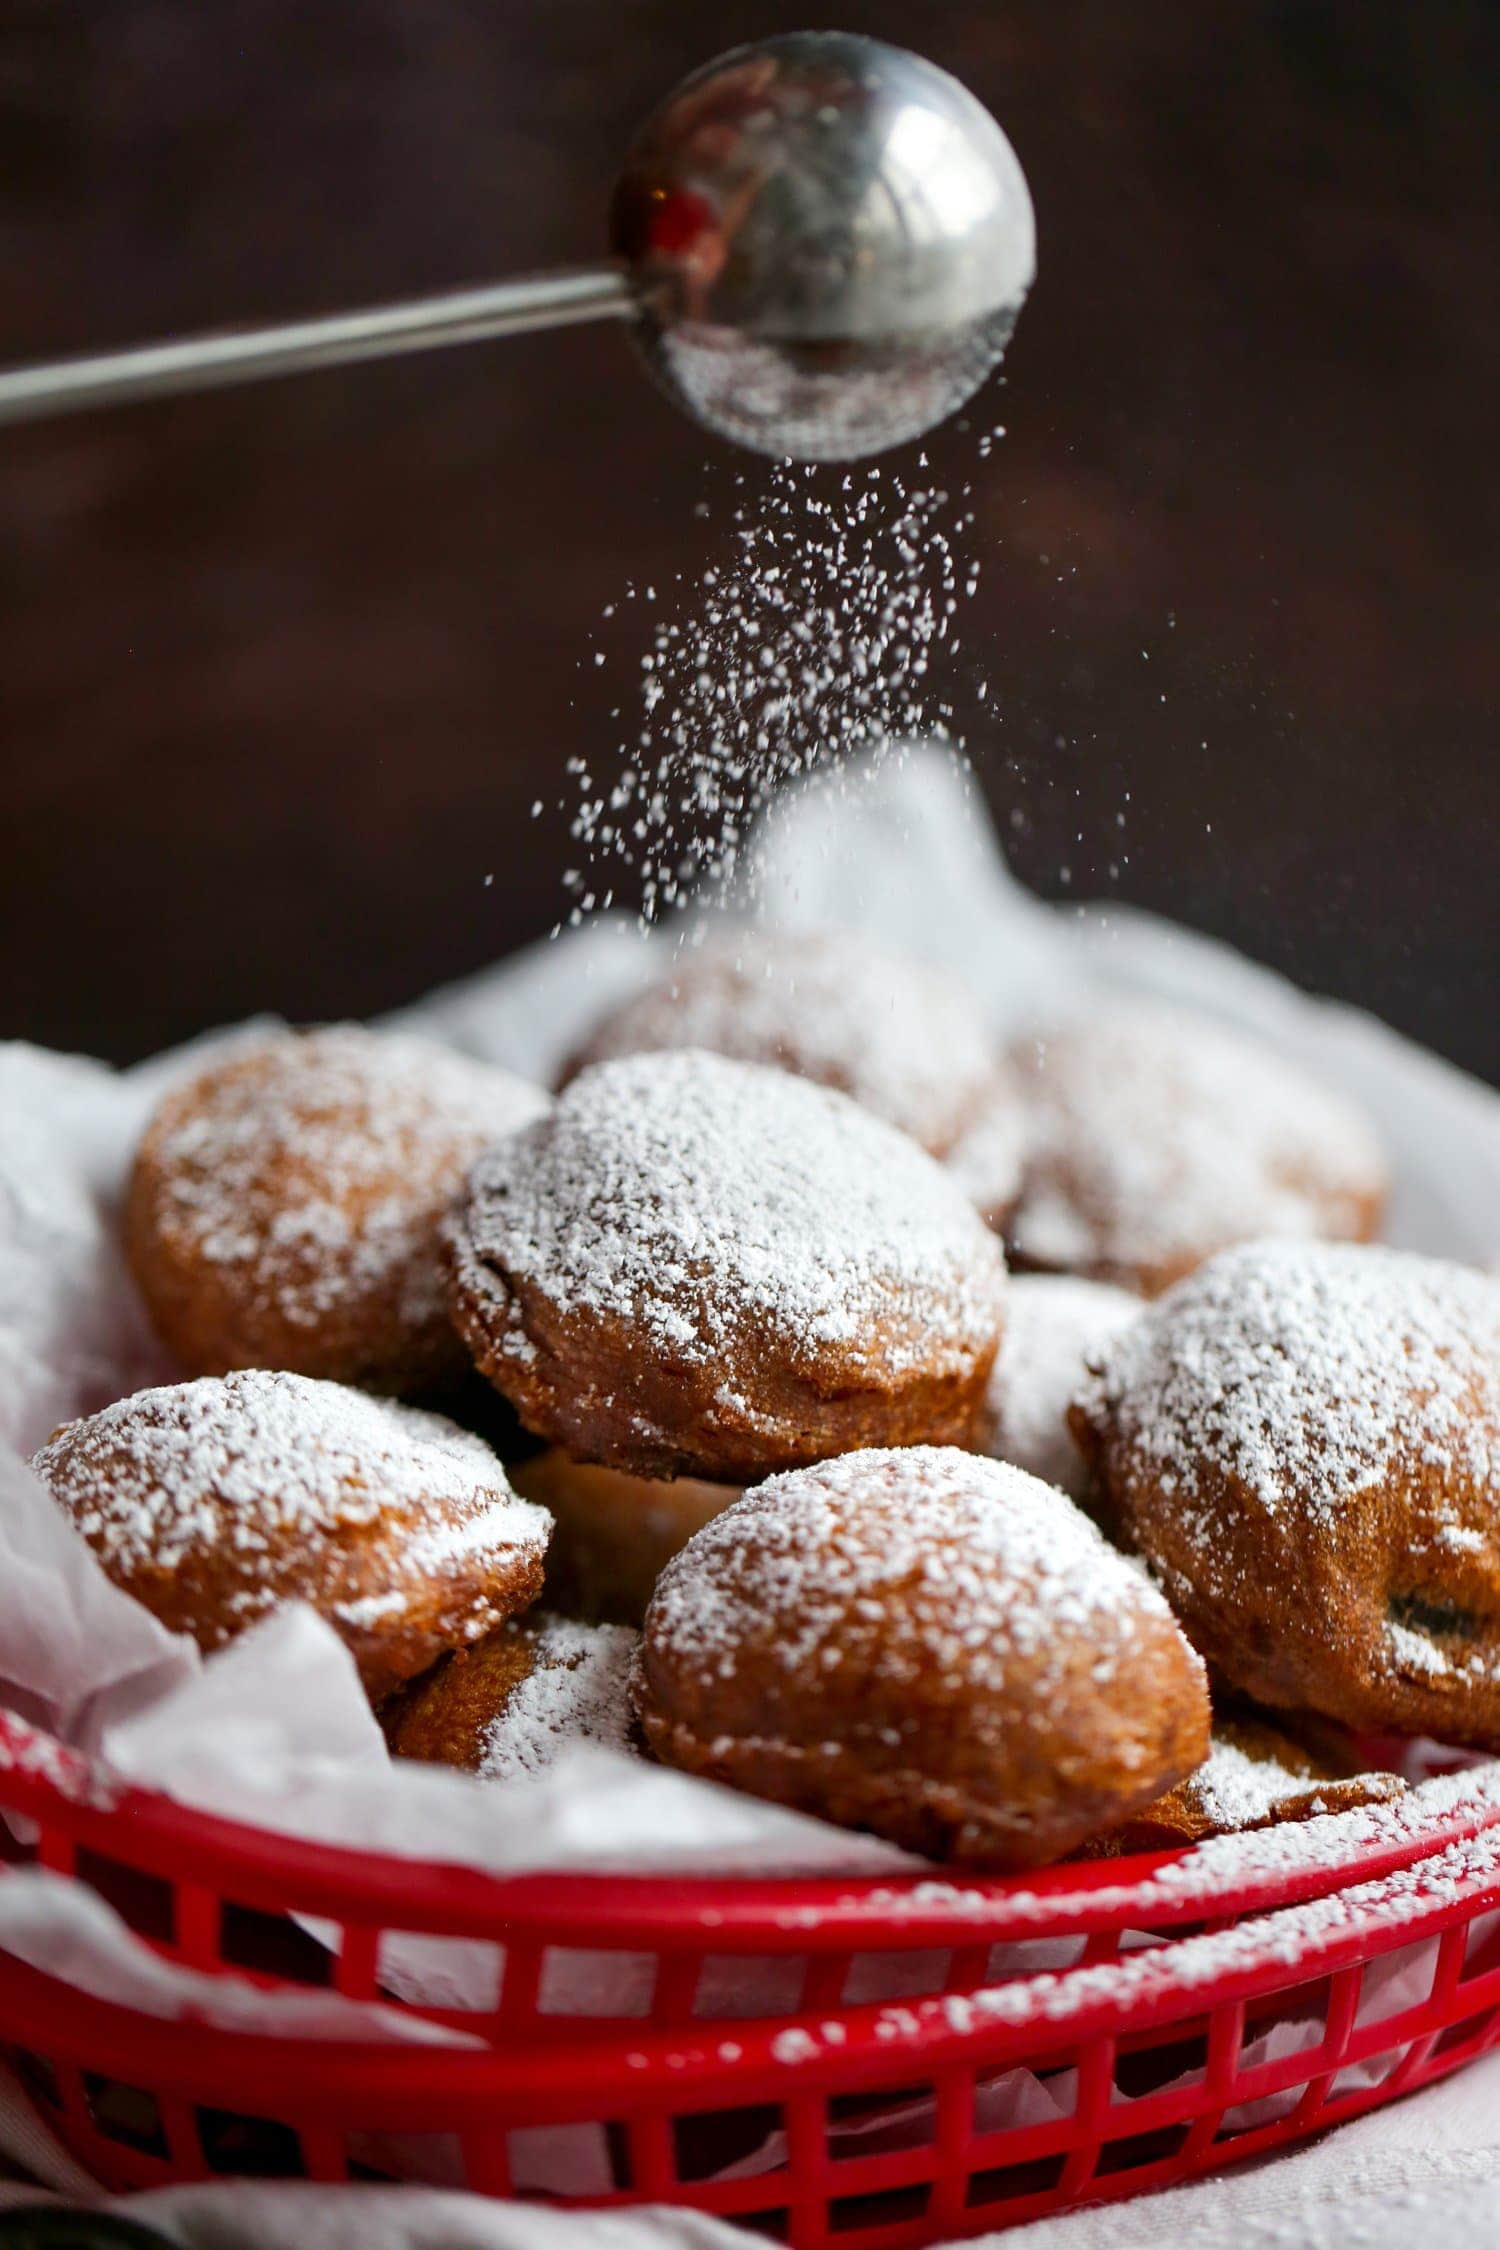 How To Make Easy Deep Fried Oreos - Cookies and Cups